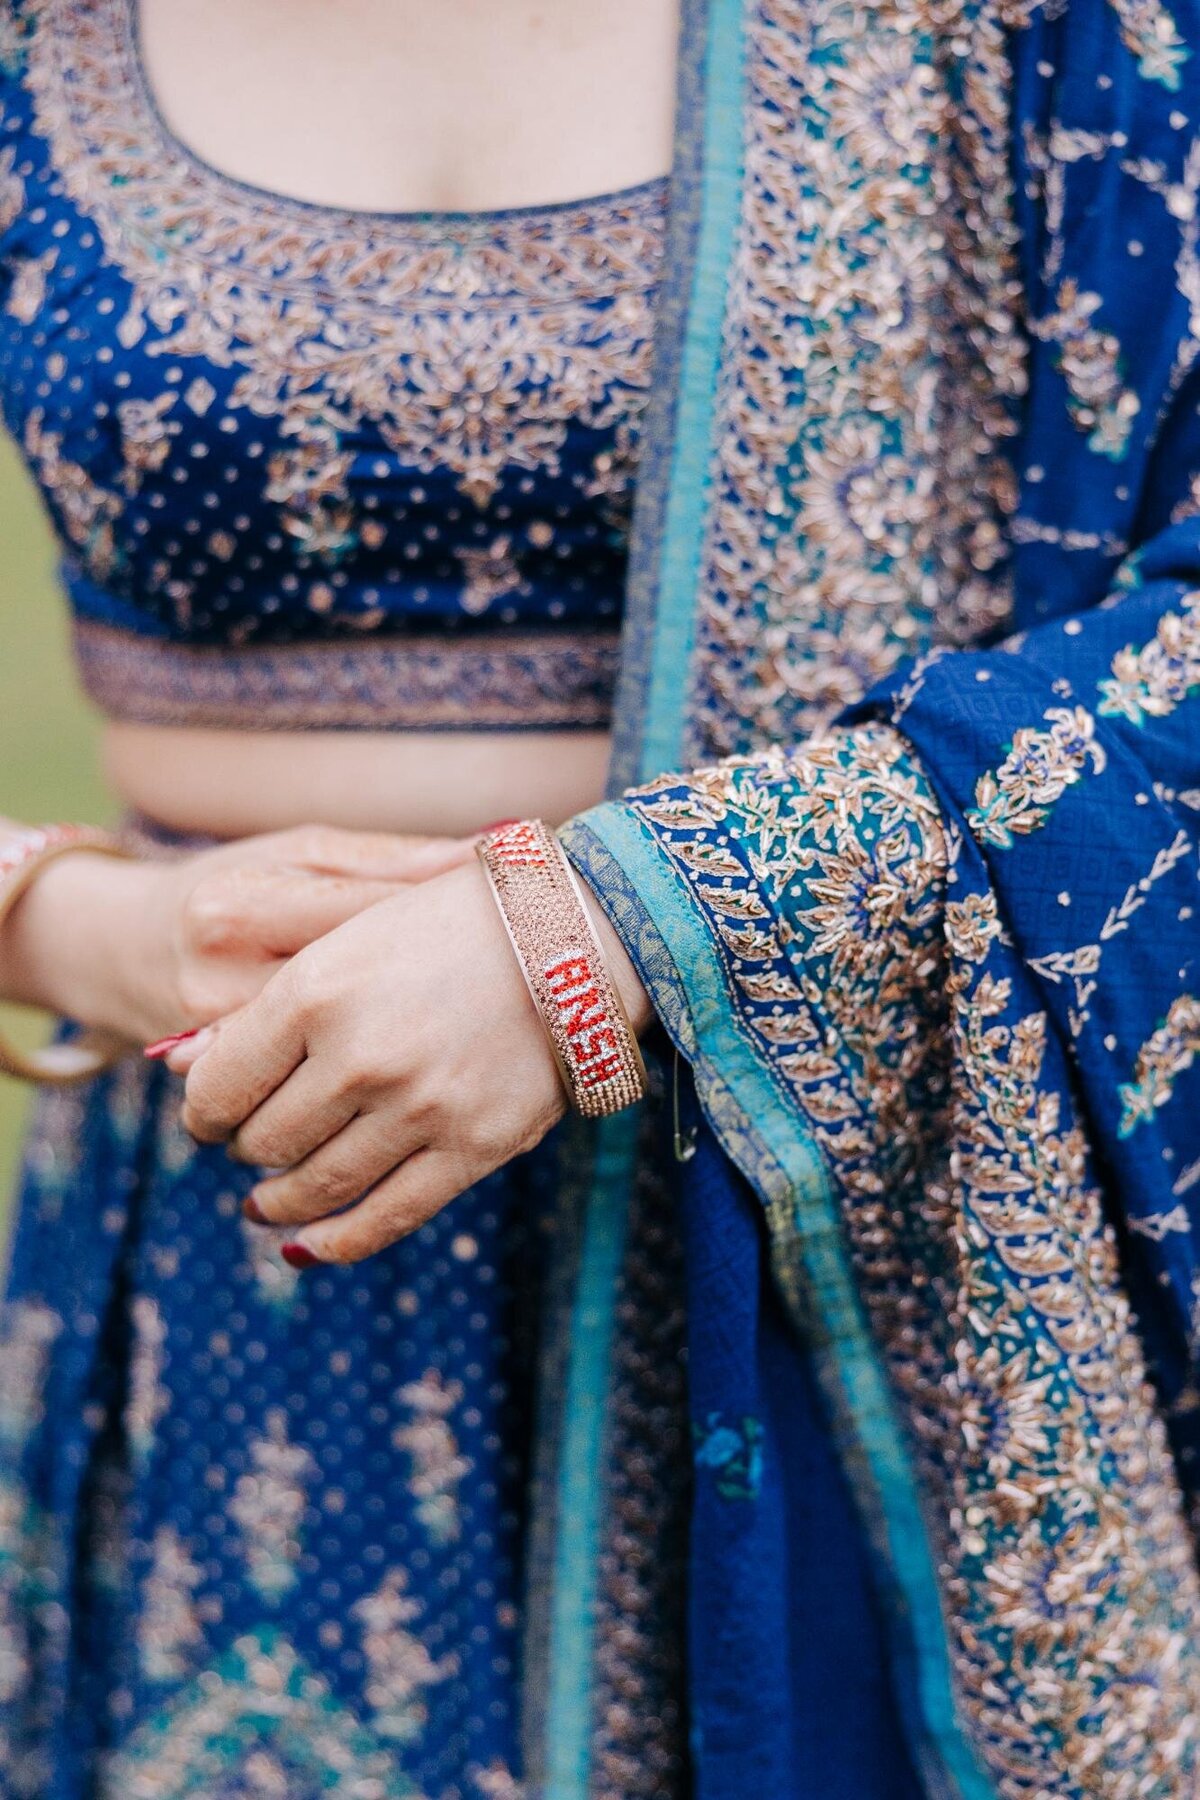 A close-up of a woman in a blue traditional embroidered dress, focusing on her hand adorned with a red and gold bracelet.